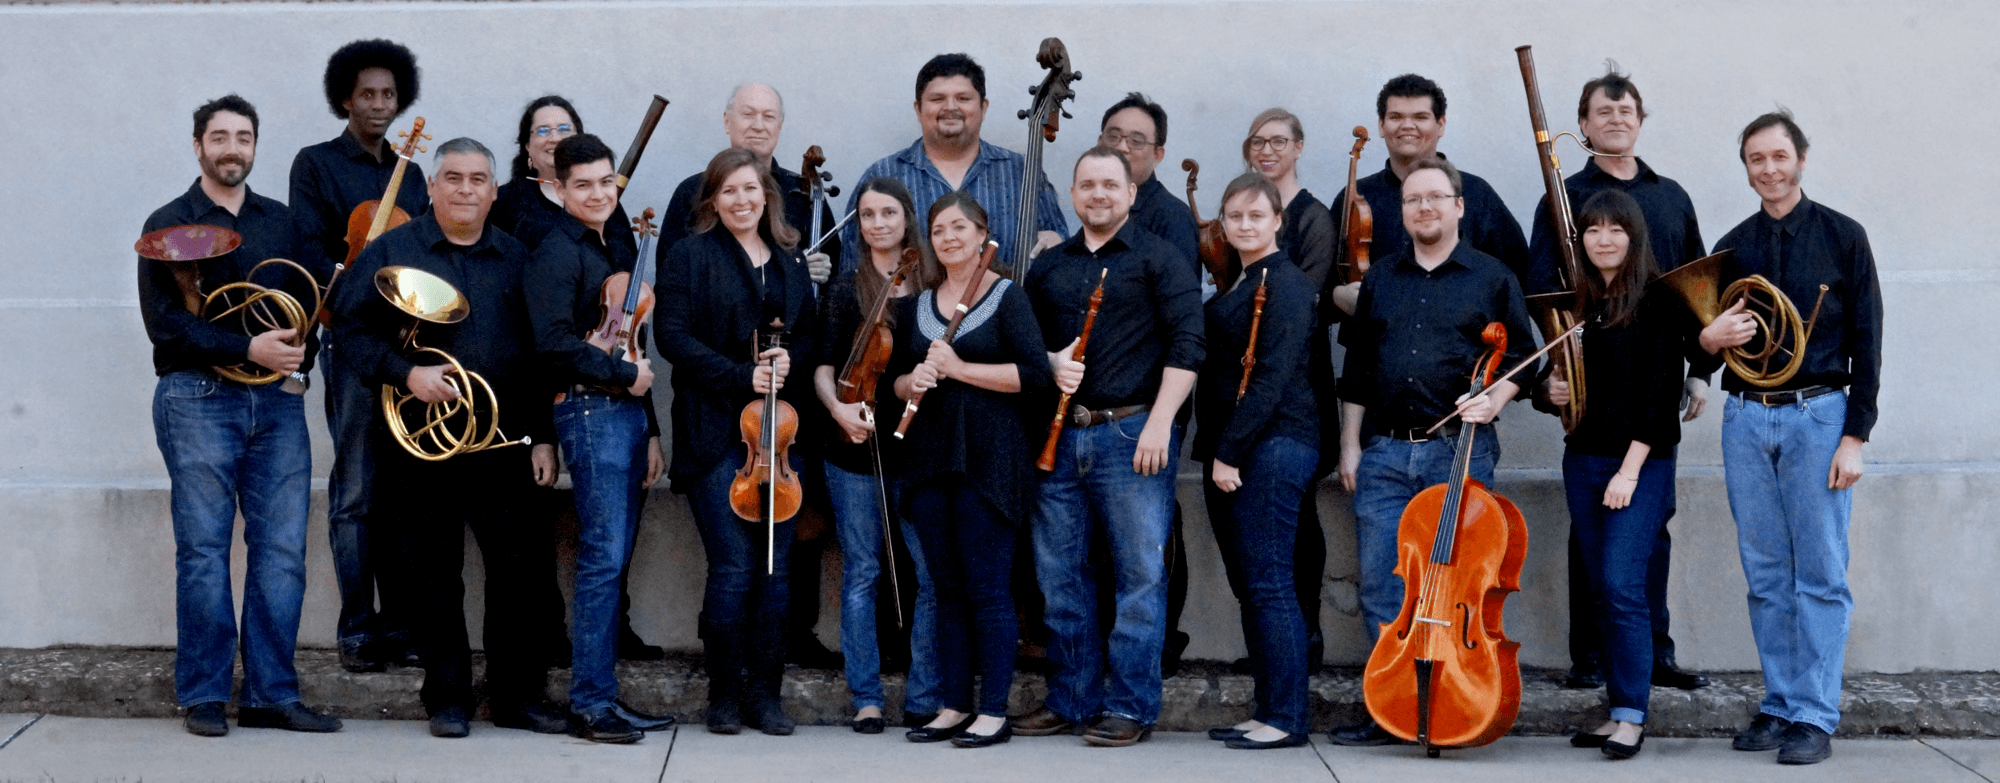 Group photograph of Austin Baroque Orchestra